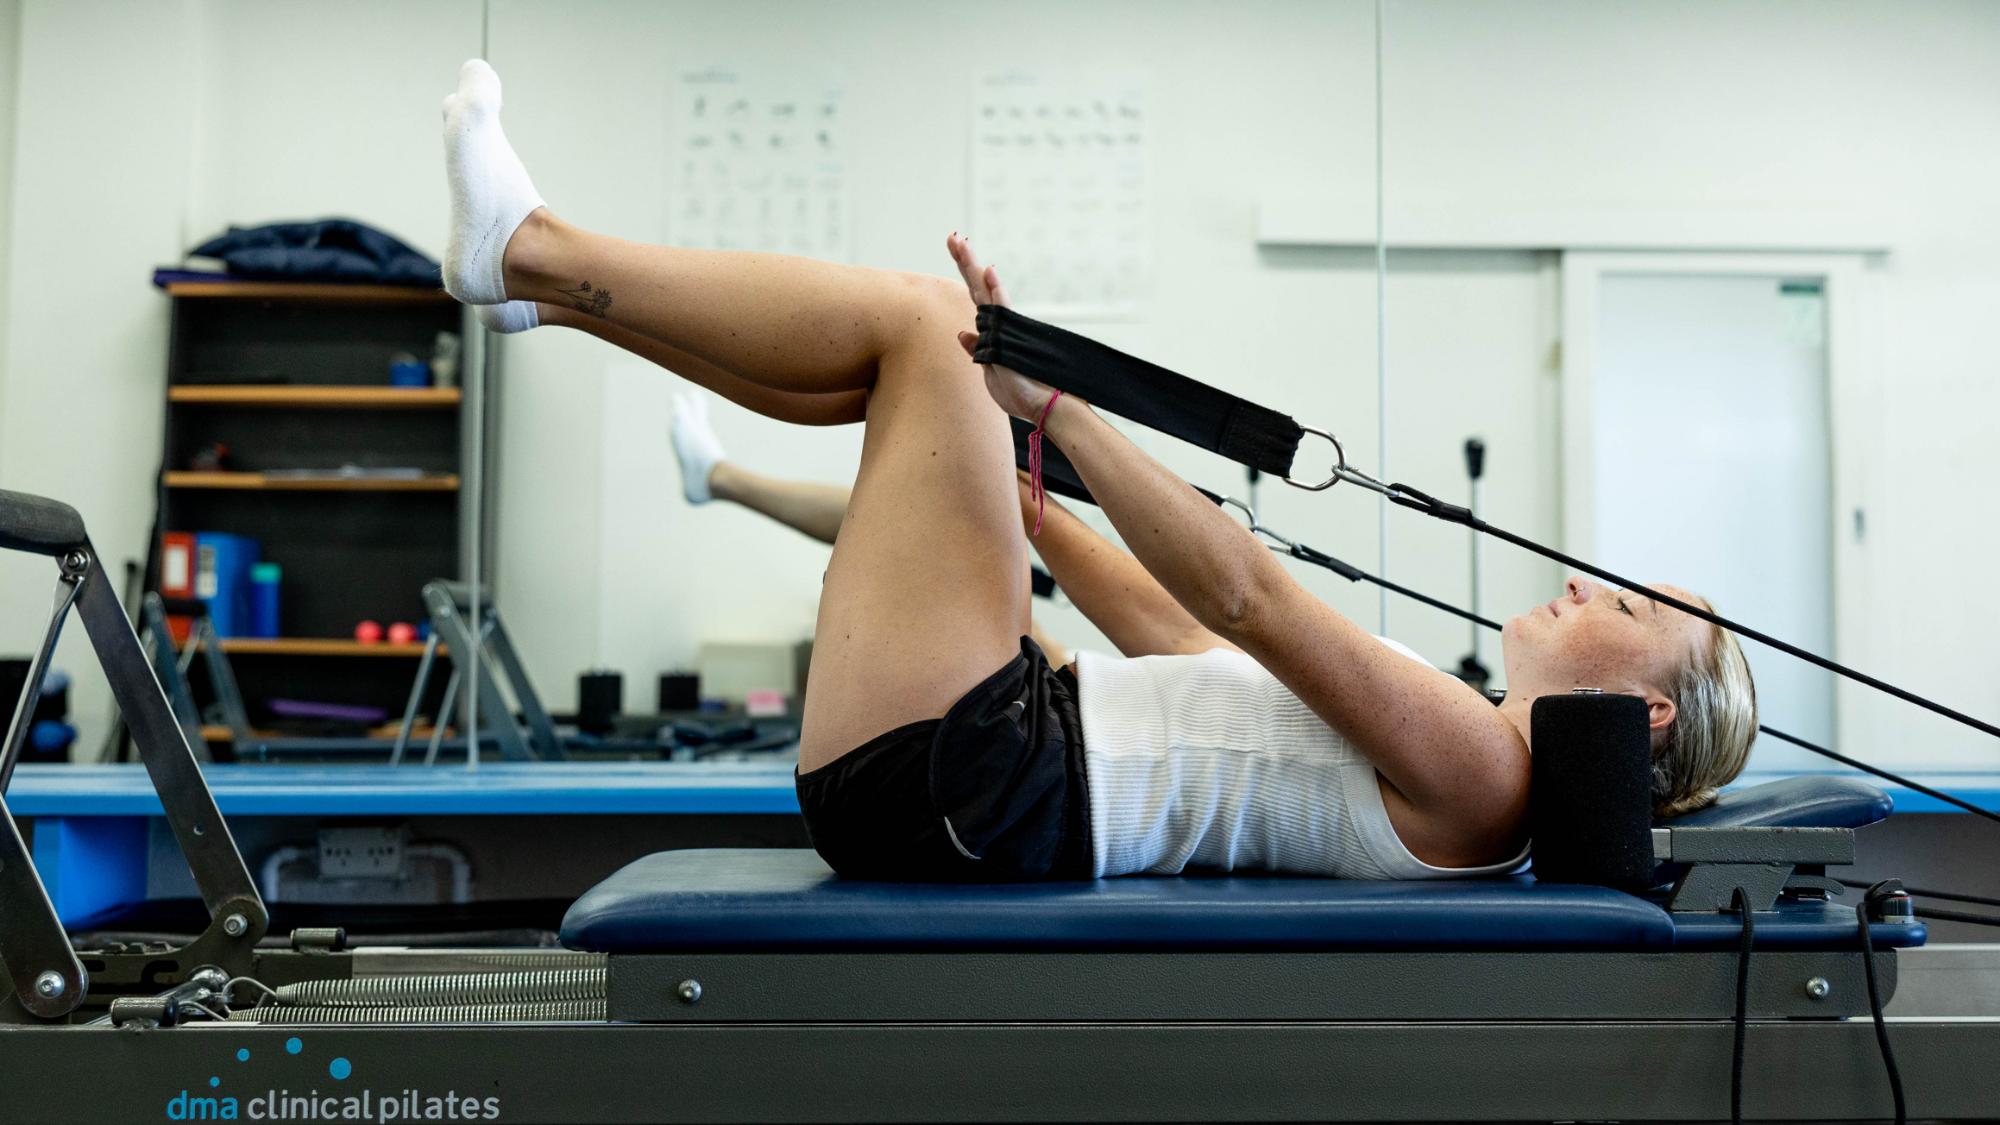 A young woman taking part in a Reformer Pilates class held by SSPC in their Pilates Studio in Melbourne.